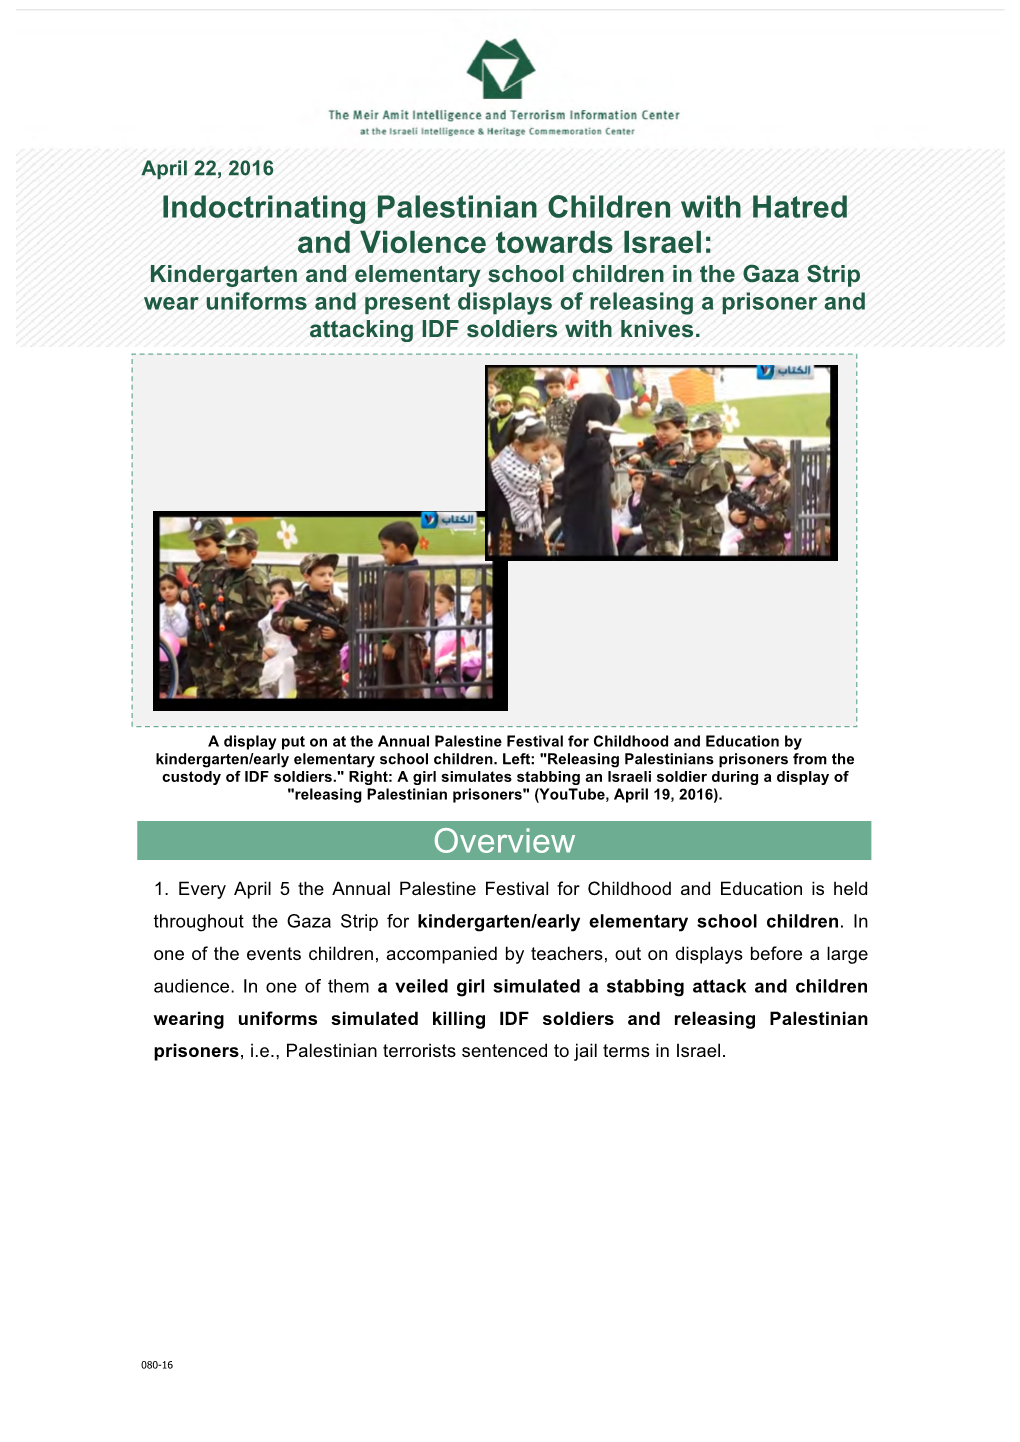 Indoctrinating Palestinian Children with Hatred and Violence Towards